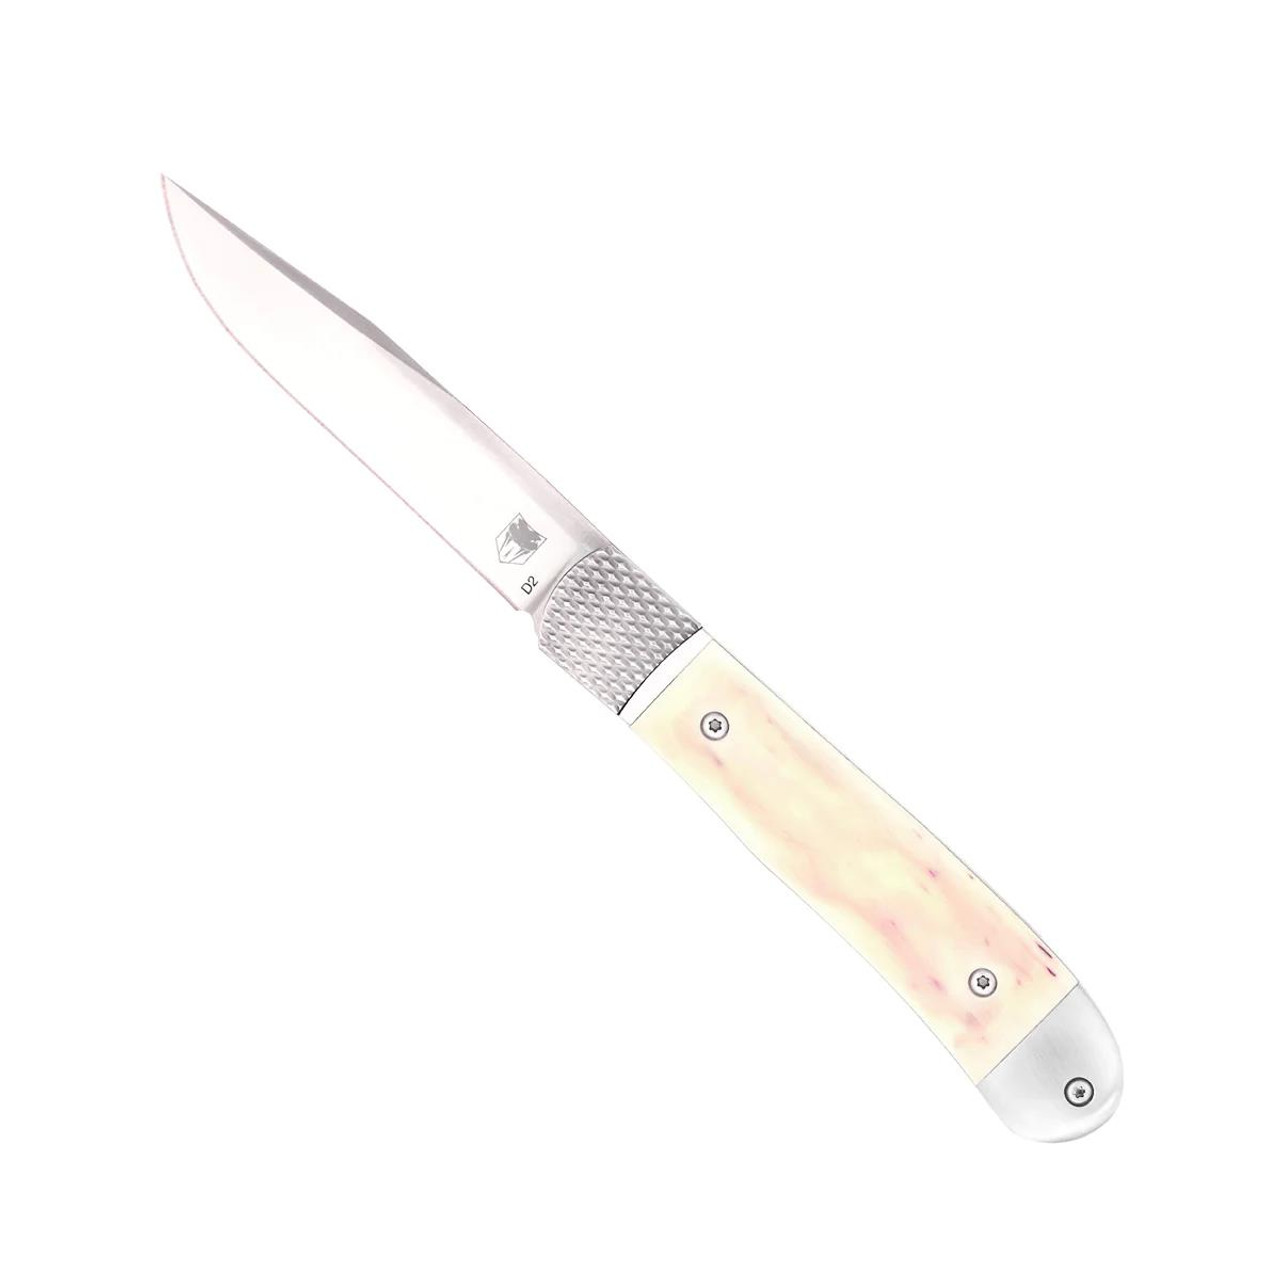 https://cdn11.bigcommerce.com/s-0xmhwue6/images/stencil/1280x1280/products/28421/69850/Cobratec-Trapper-Hidden-Release-Knife-White-099654043174_image1__17089.1693505944.jpg?c=2